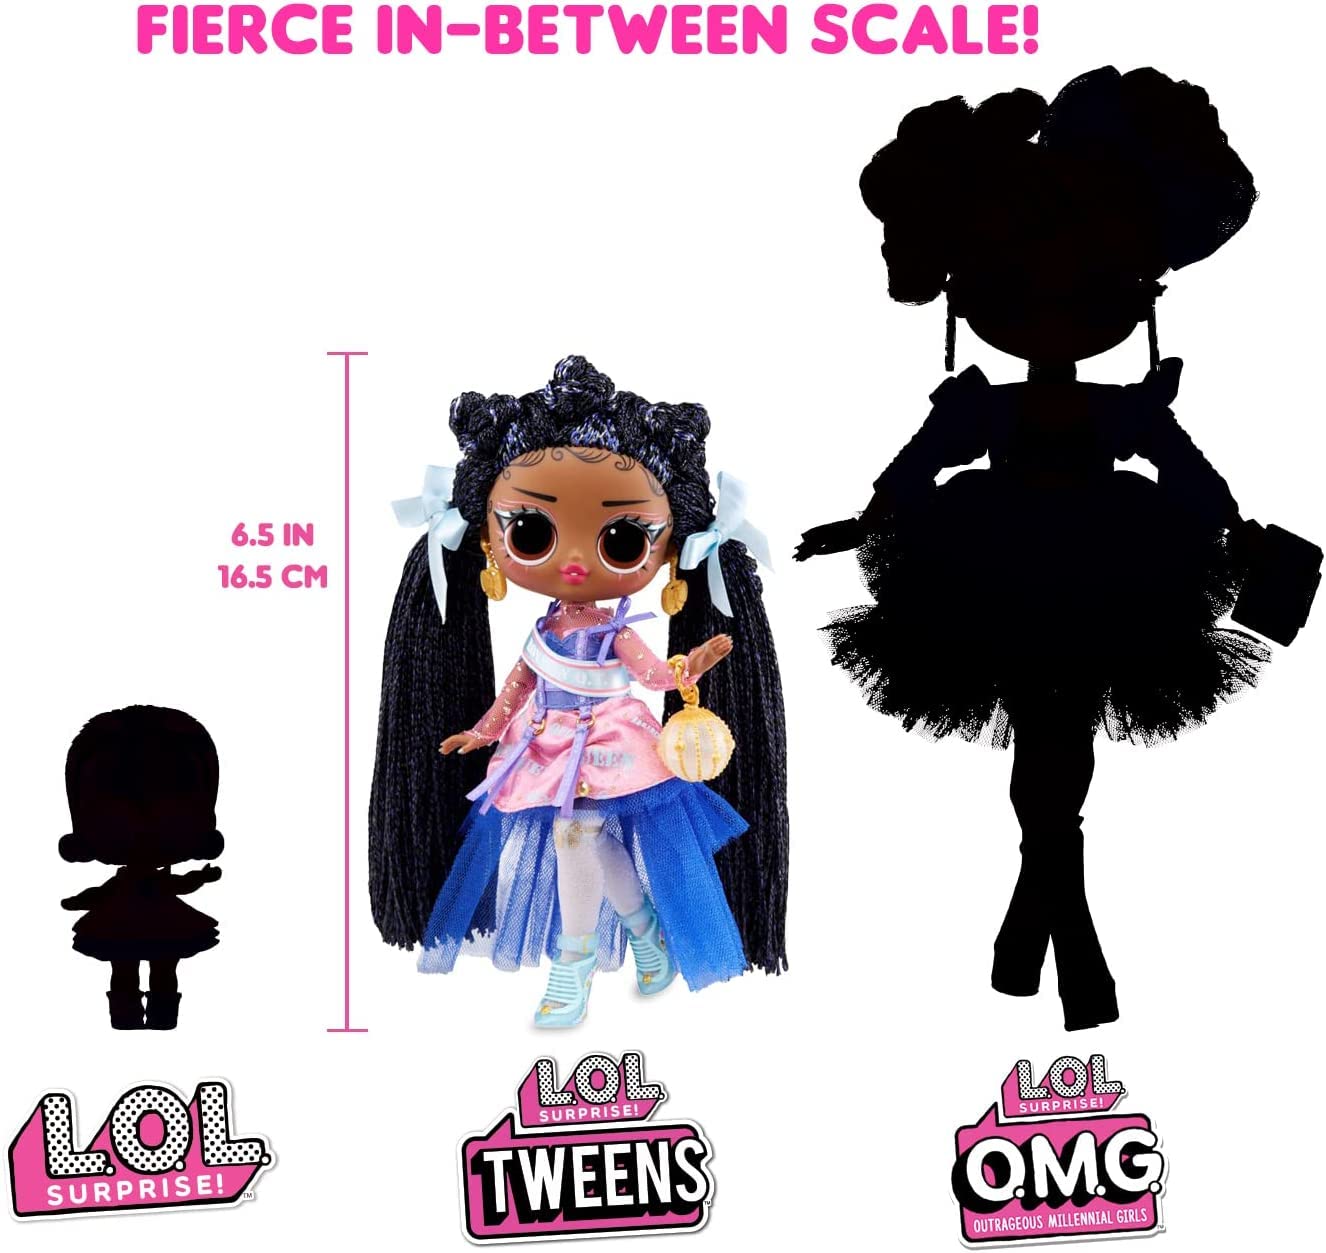 L.O.L. Surprise! Tweens Series 3 Nia Regal Fashion Doll with 15 Surprises Including Accessories for Play & Style, Holiday Toy Playset, Great Gift for Kids Girls Boys Ages 4 5 6+ Years Old